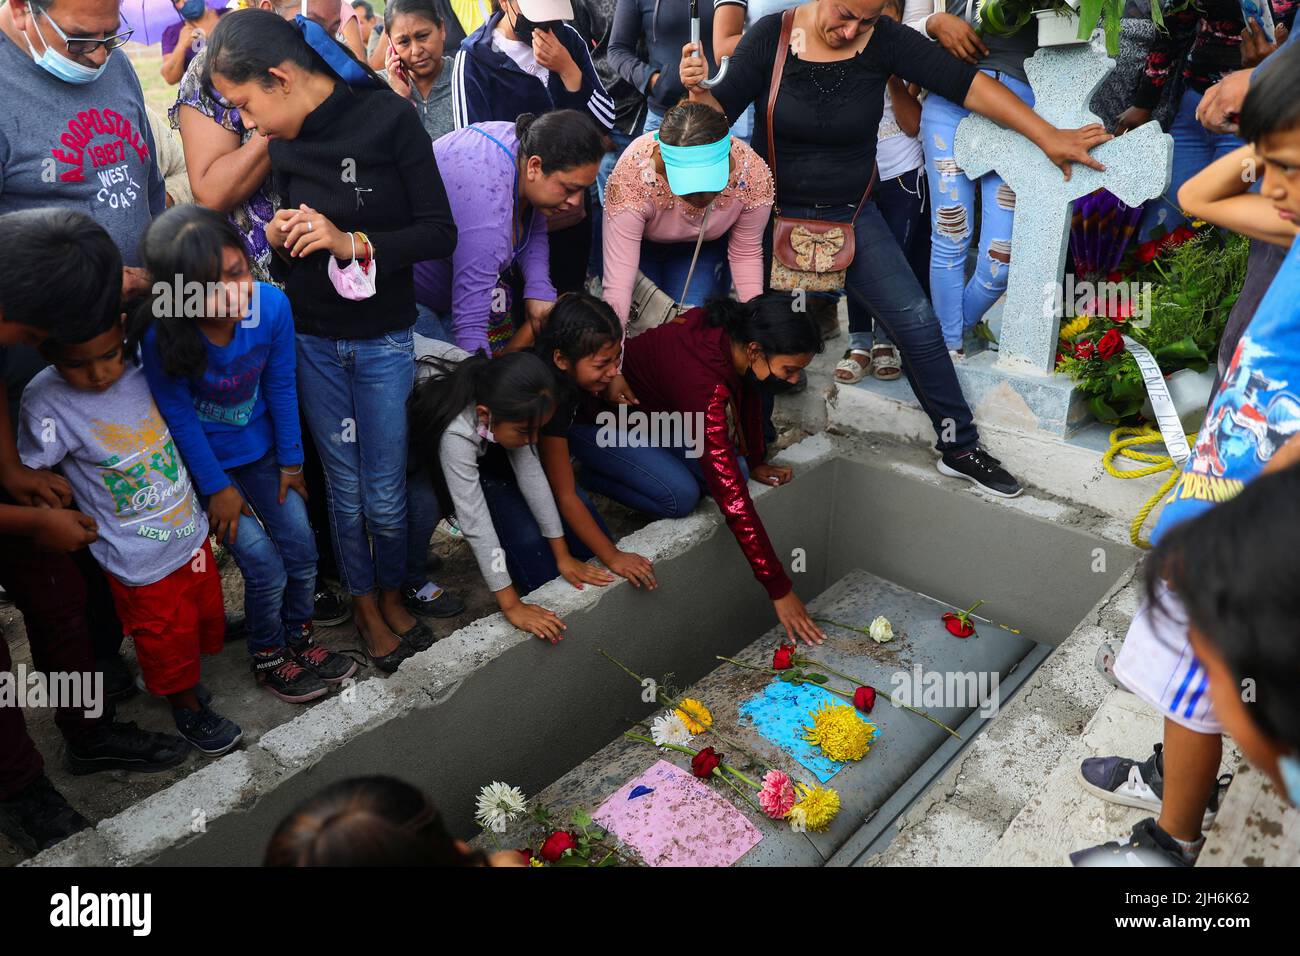 People react over the coffin of late migrant Jose Lopez, 34, who died in a trailer truck in Texas, during his burial, in Celaya, Guanajuato state, Mexico, July 15, 2022. REUTERS/Edgard Garrido Stock Photo